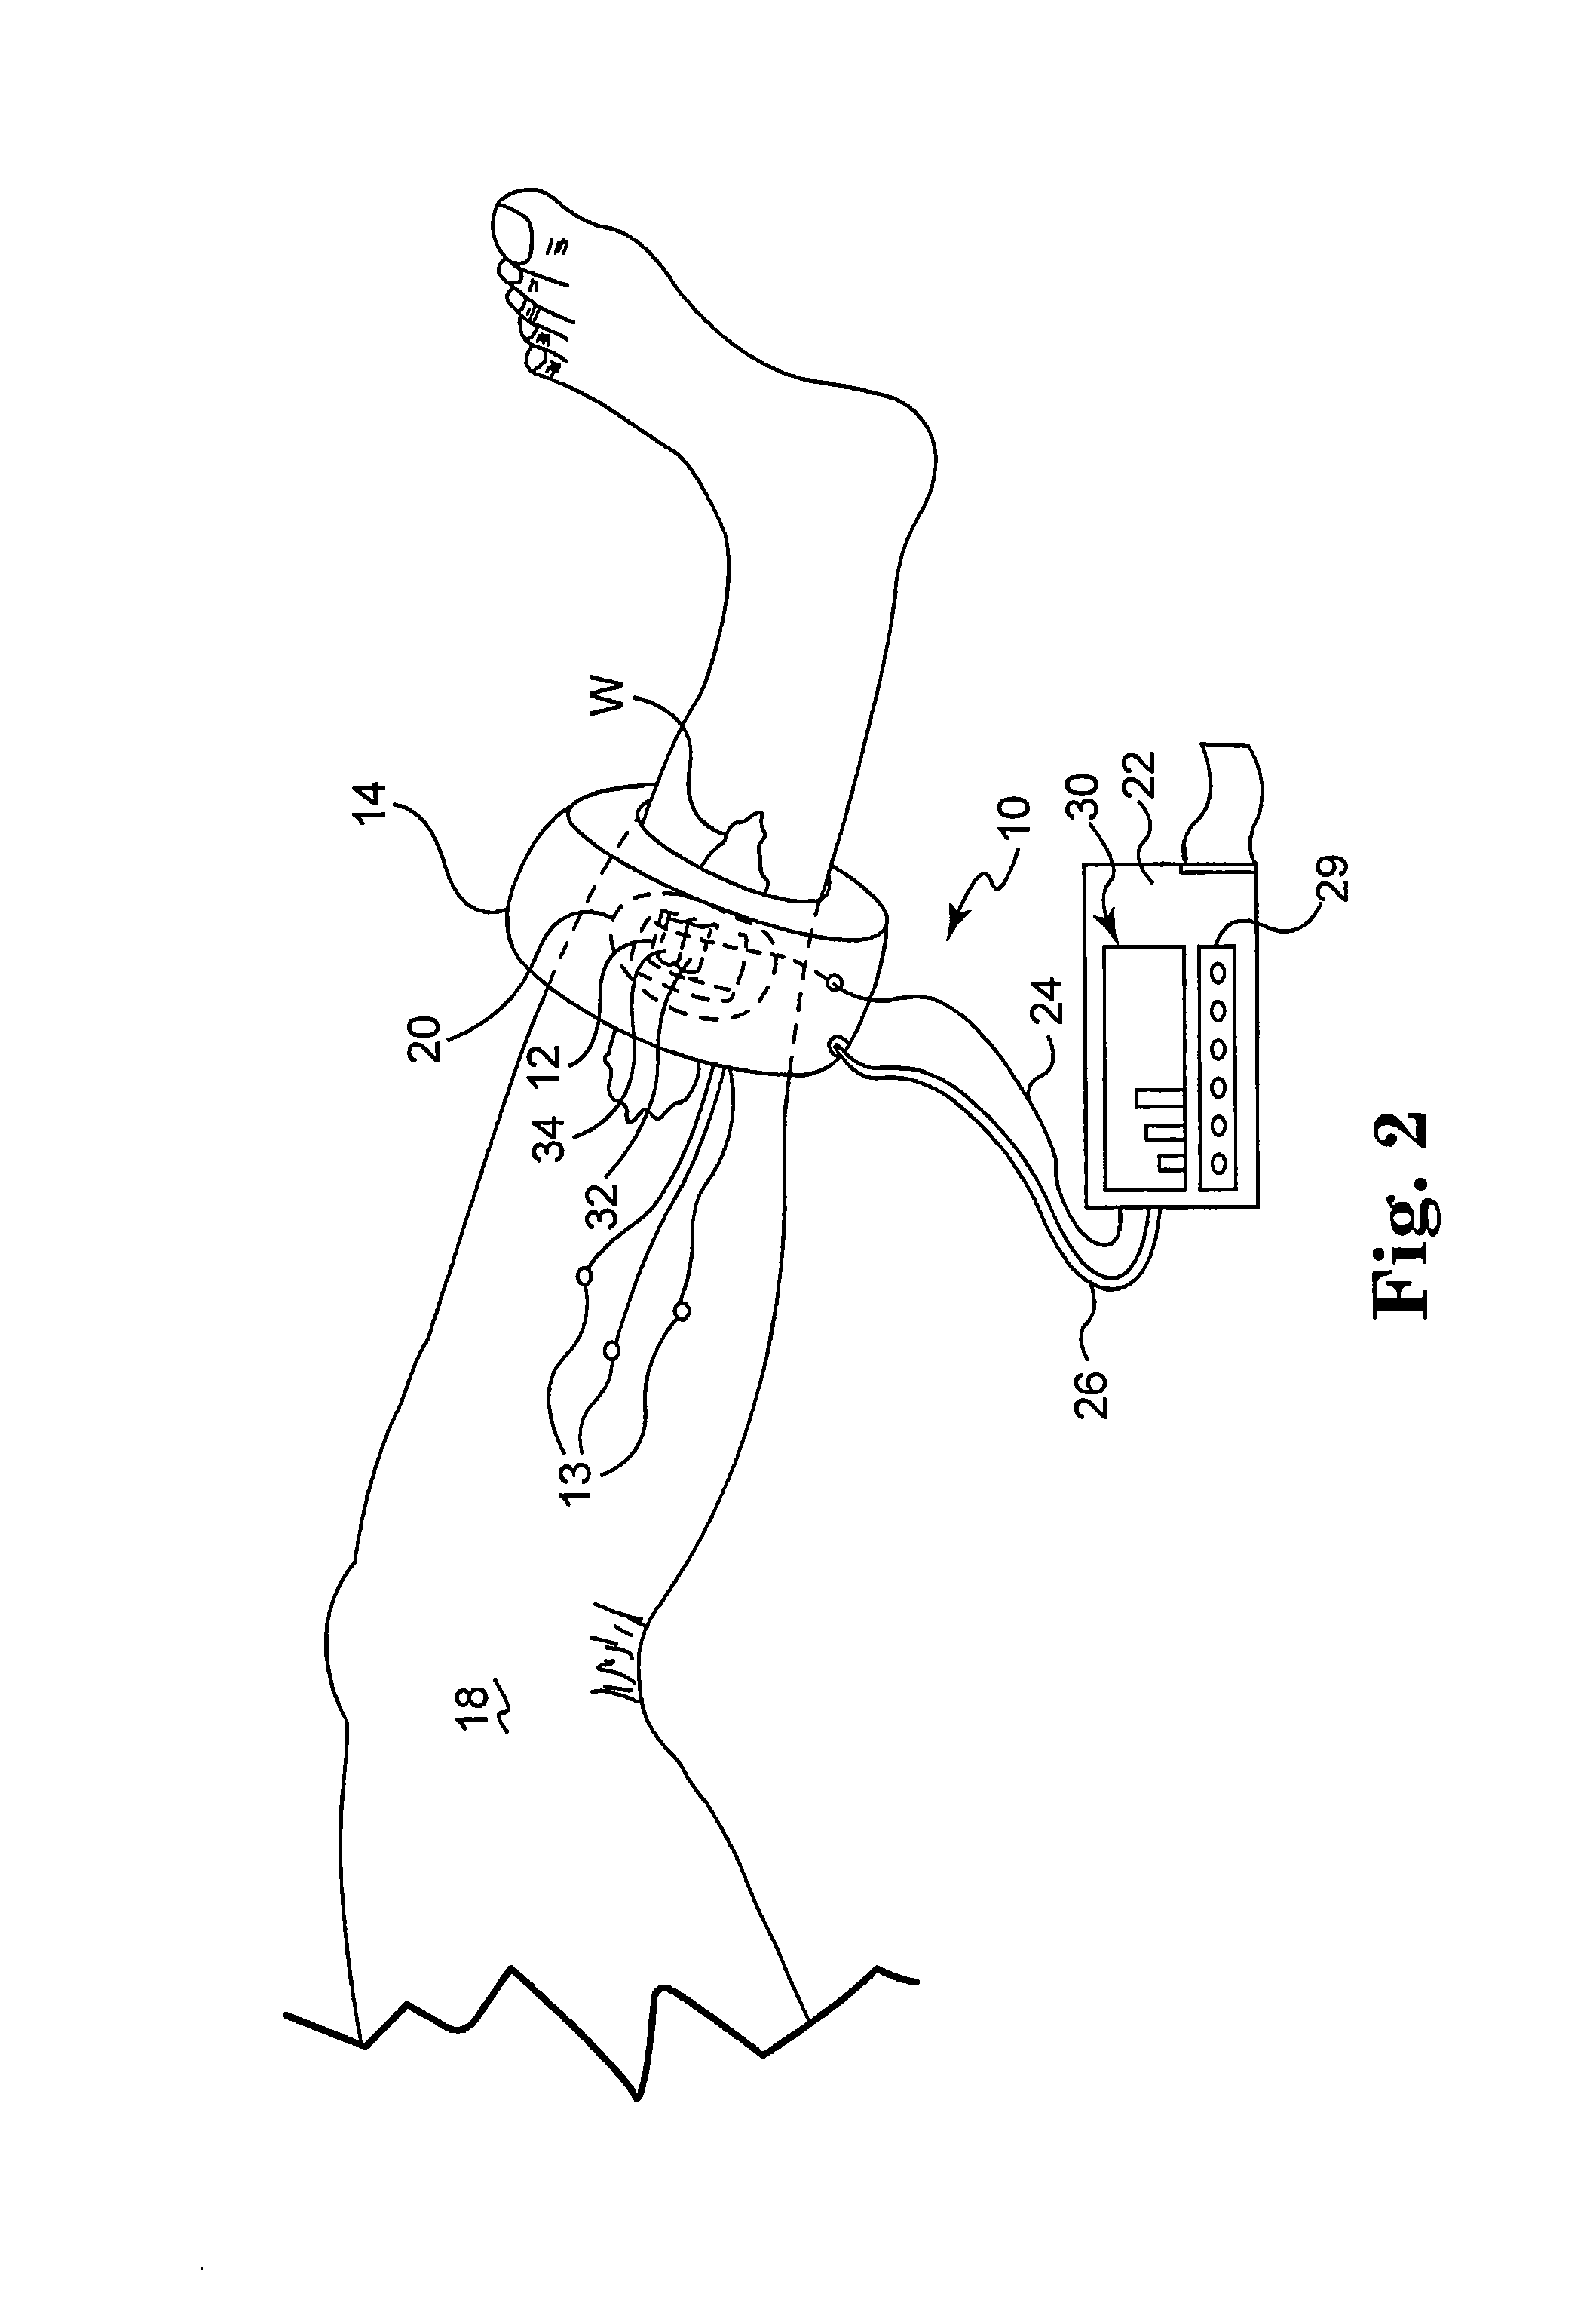 System and method for assessing capillary vitality